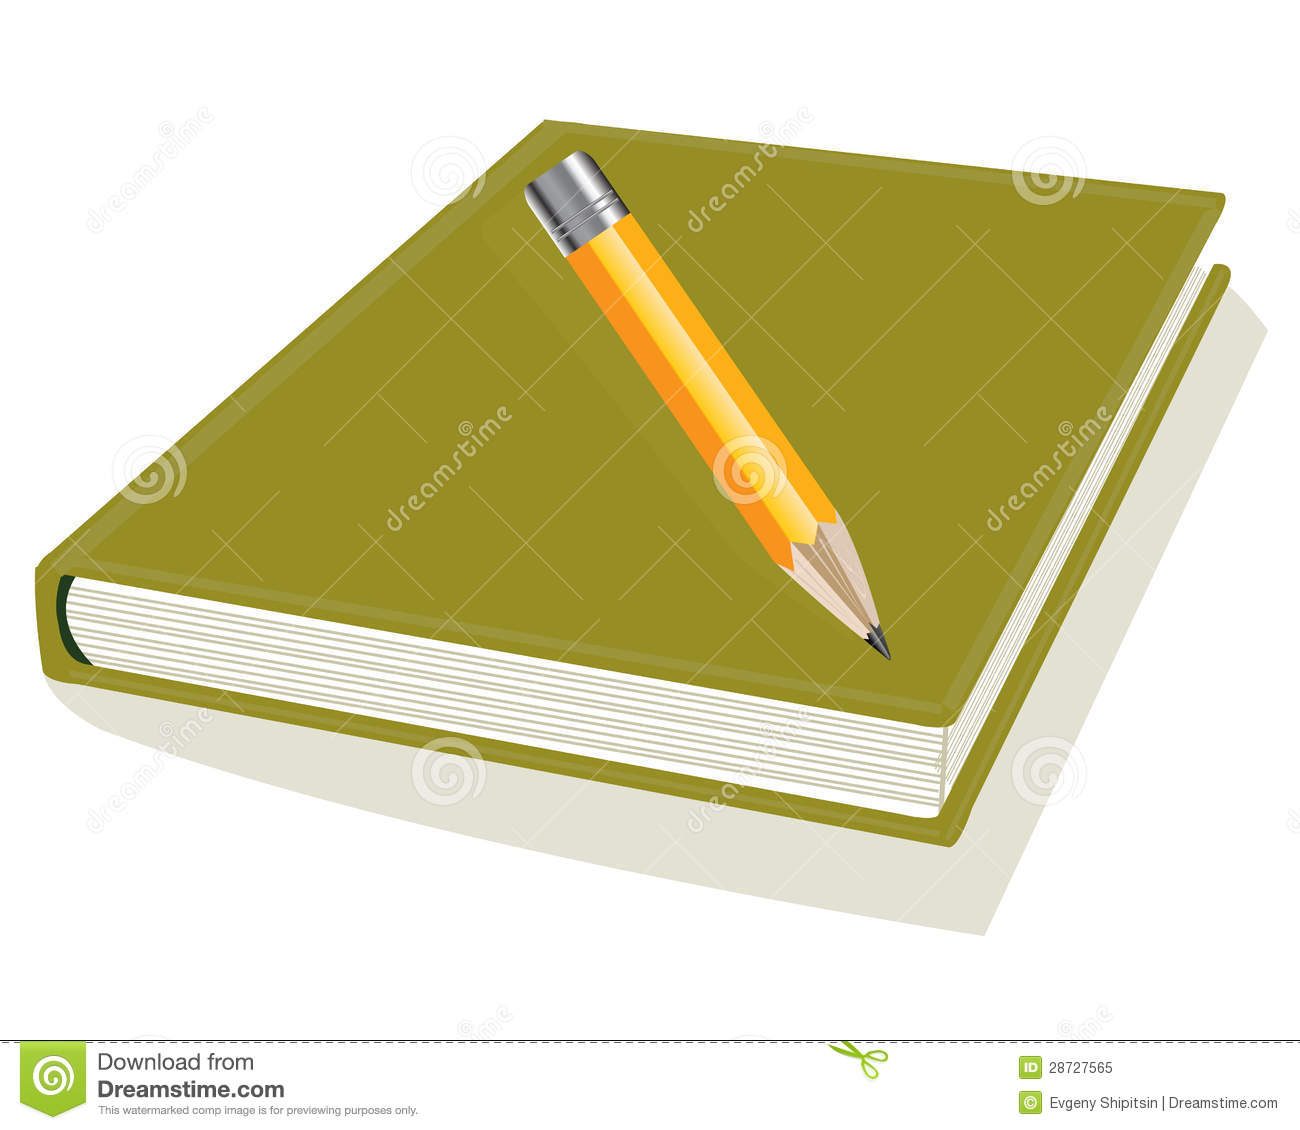 Illustration Of The Book And Pencil On White Background Is Insulated